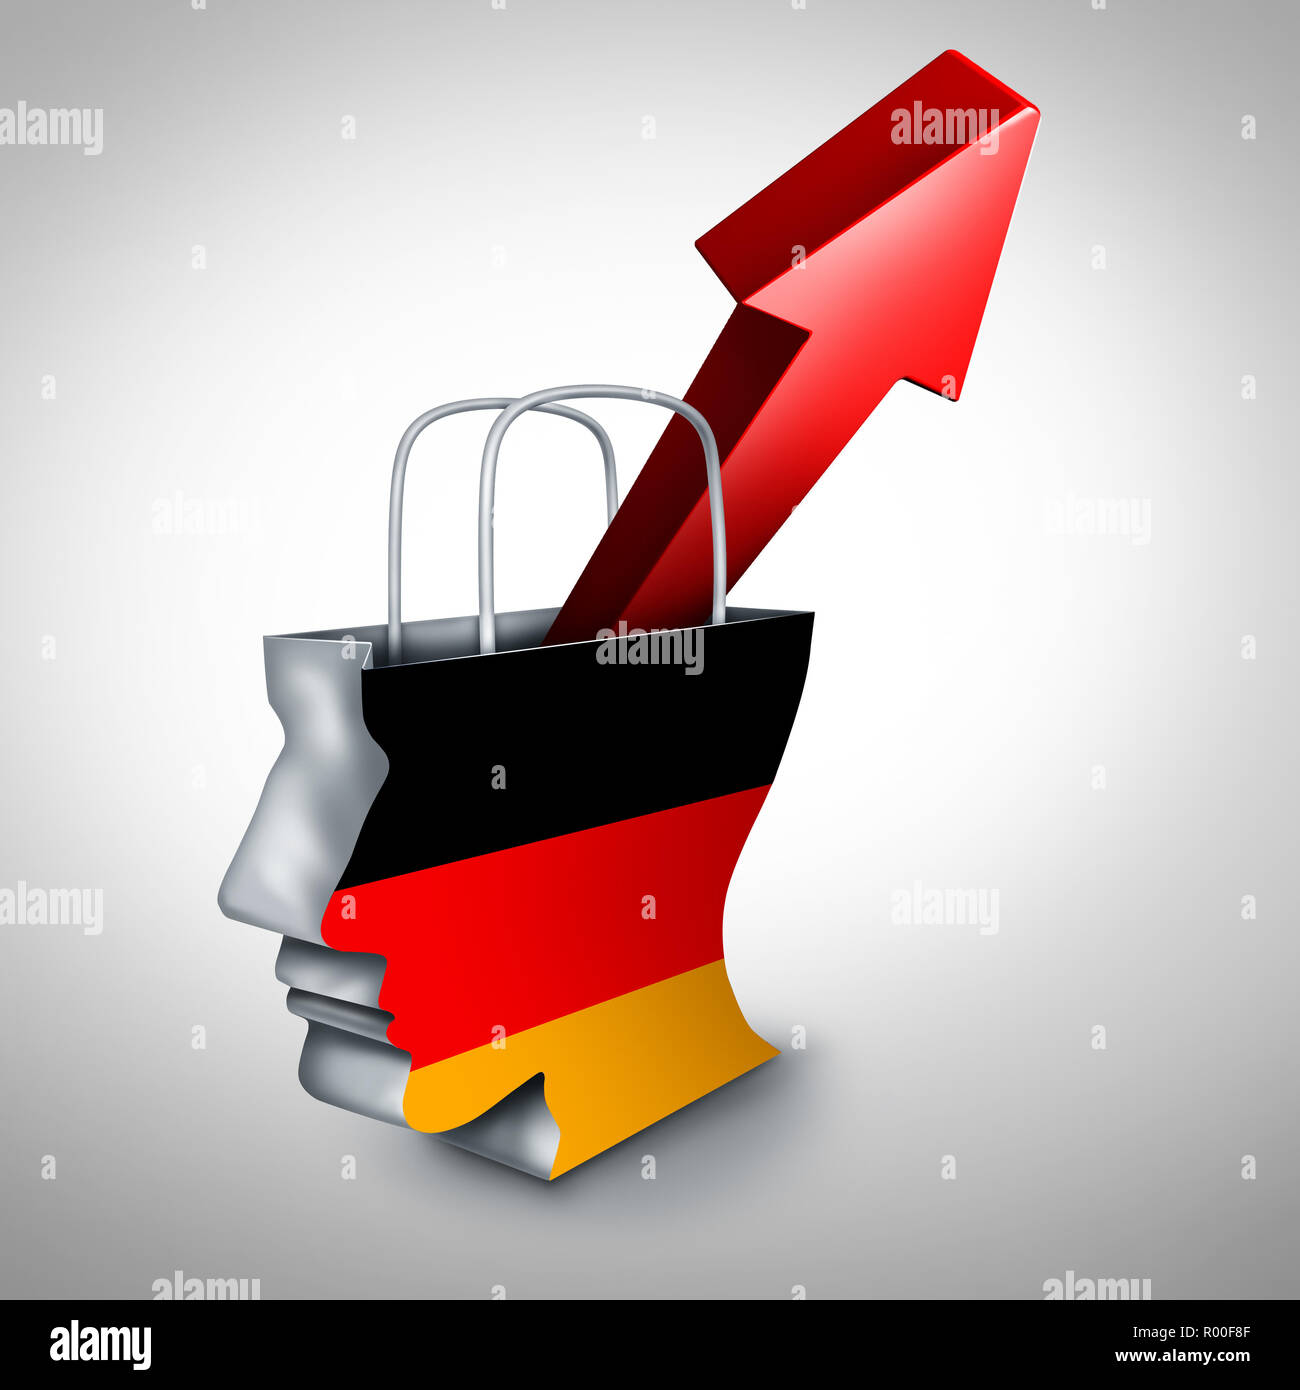 Germany inflation rise in a booming German economy and financial market of goods and services or European surging consumer prices and economic. Stock Photo